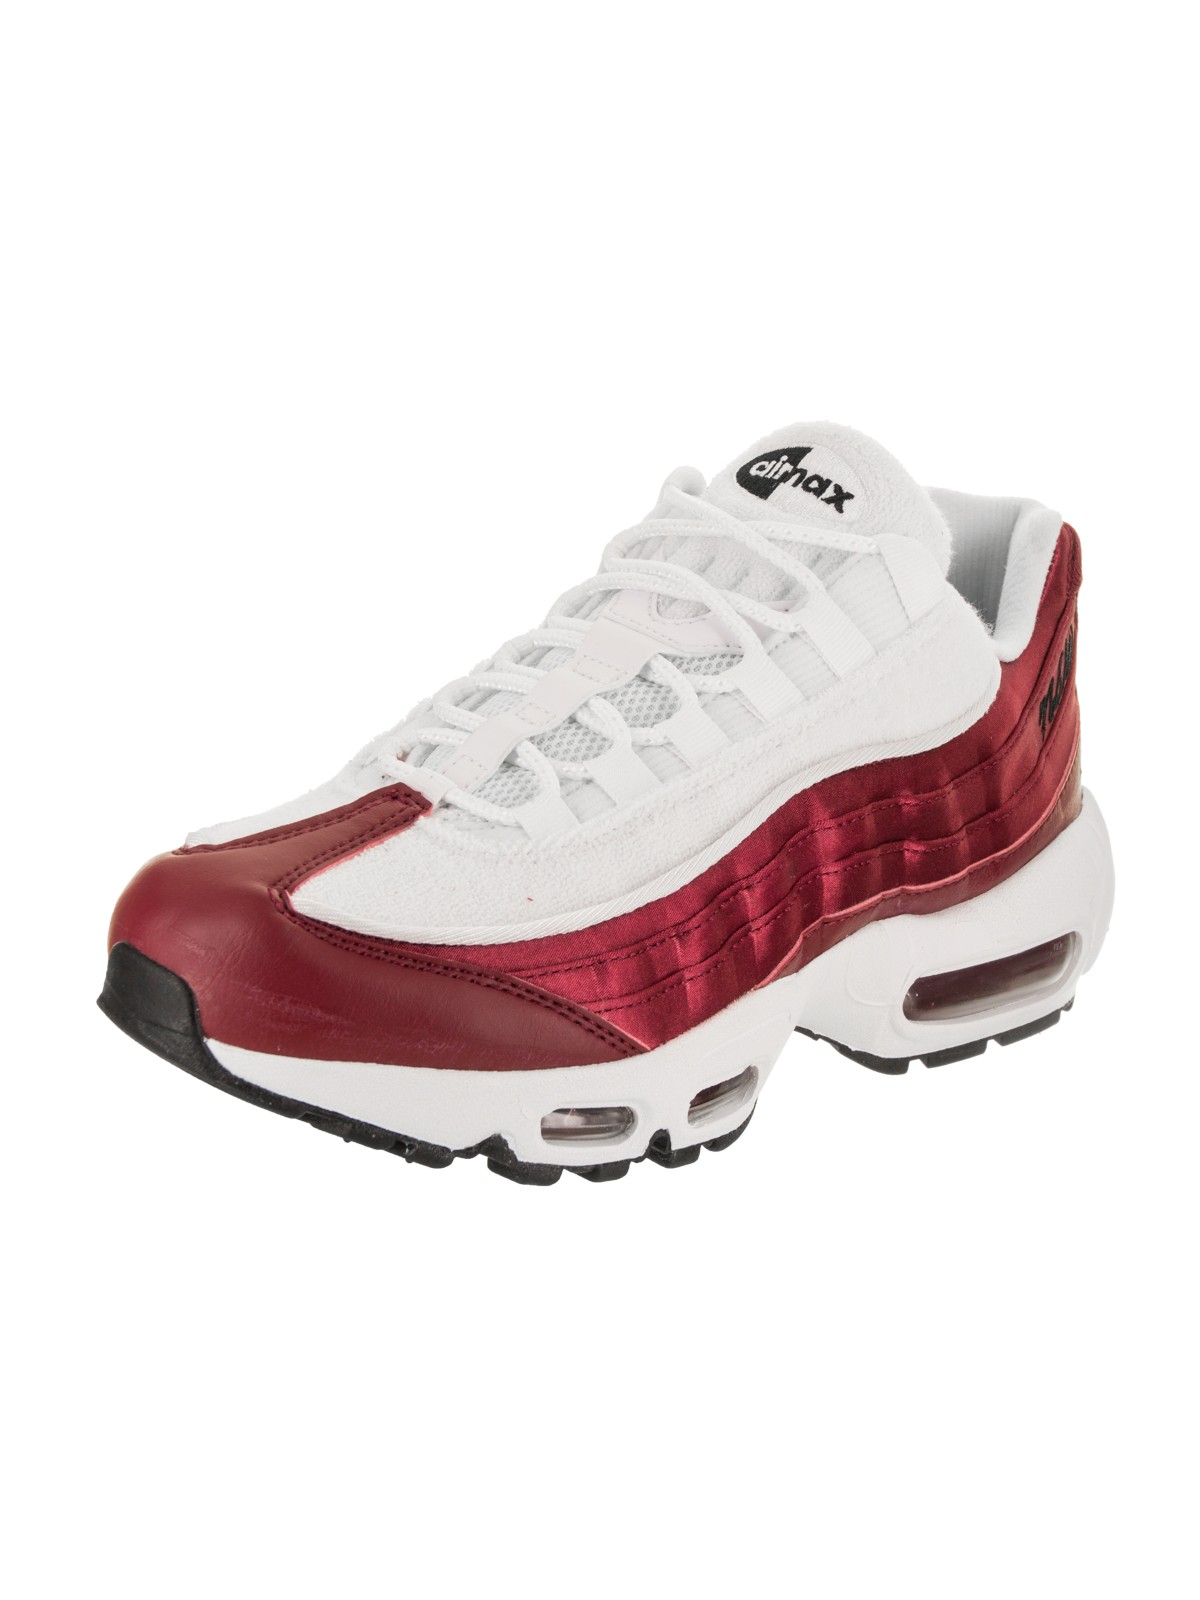 Nike Women's Air Max 95 LX Casual Shoe - image 1 of 5